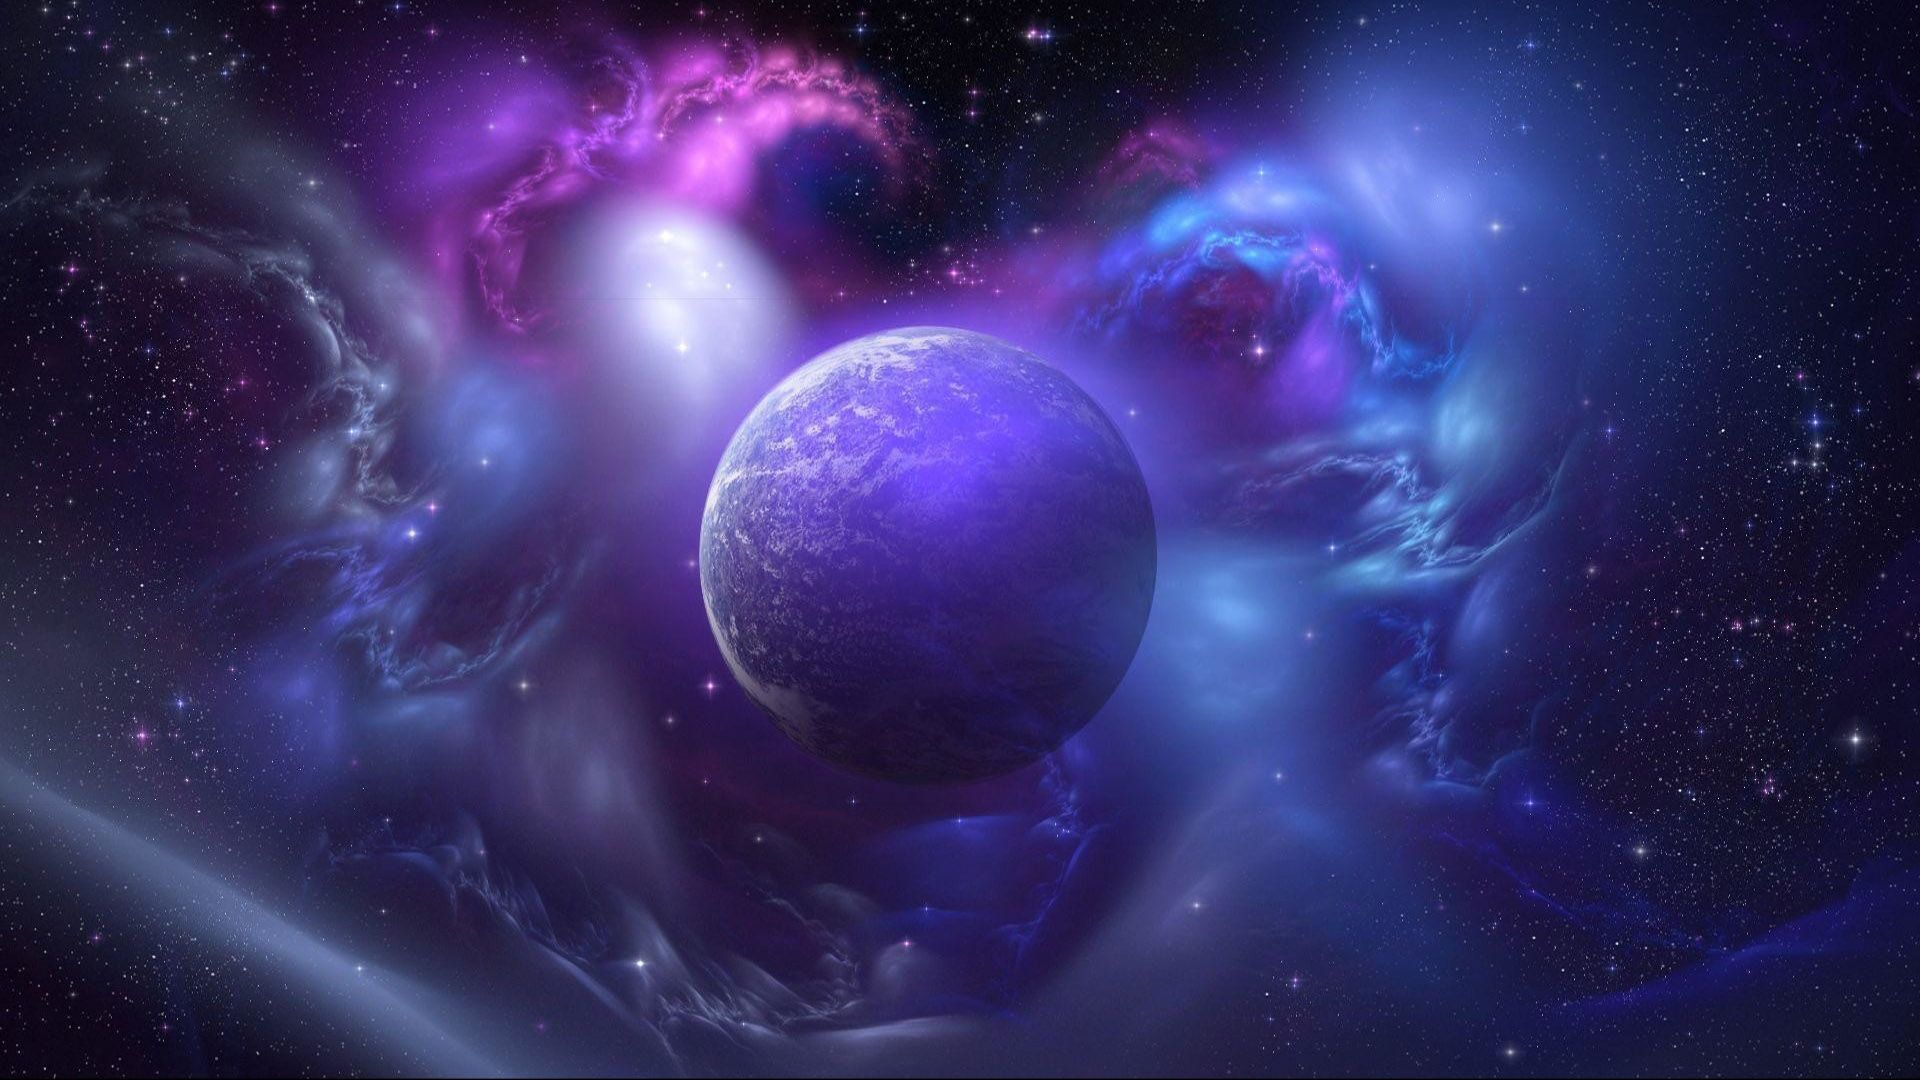 Space Planet Galaxy Animated Wallpaper For Desktop Laptop Tablet